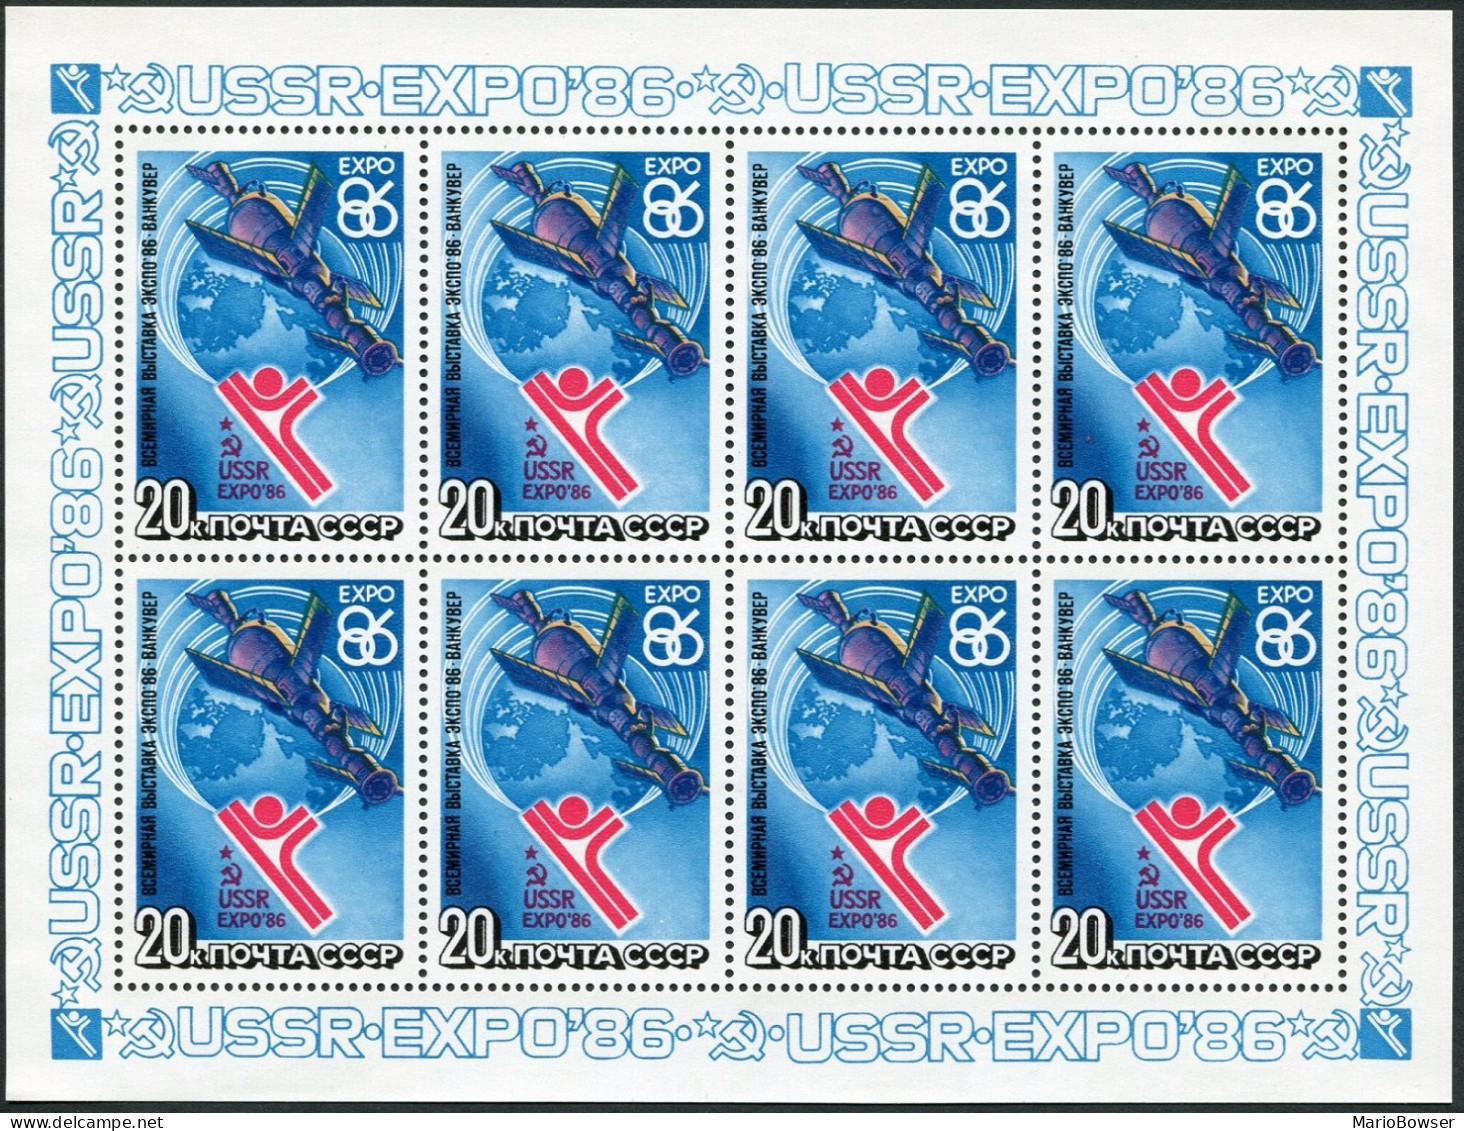 Russia 5440a Sheet, MNH. Michel 5589 Klb. EXPO-1986, Vancouver. Space Station. - Ongebruikt